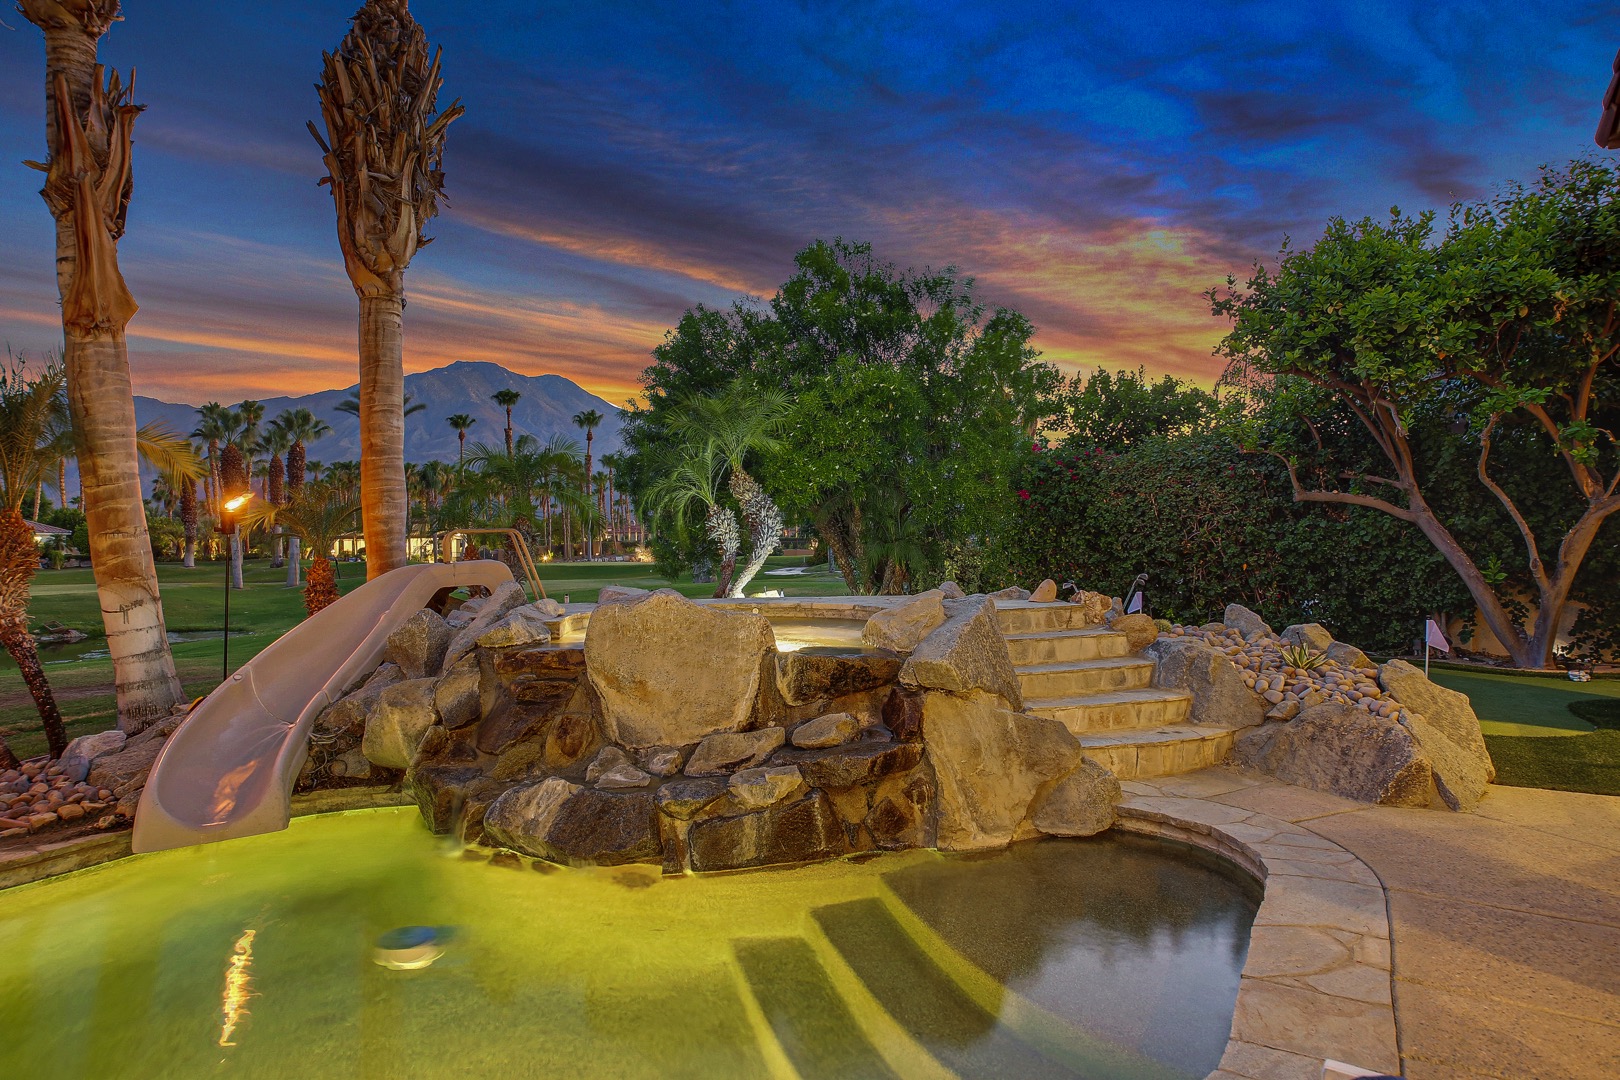 Entertainment for the kids include a fun water slide that dives right into the refreshing pool.